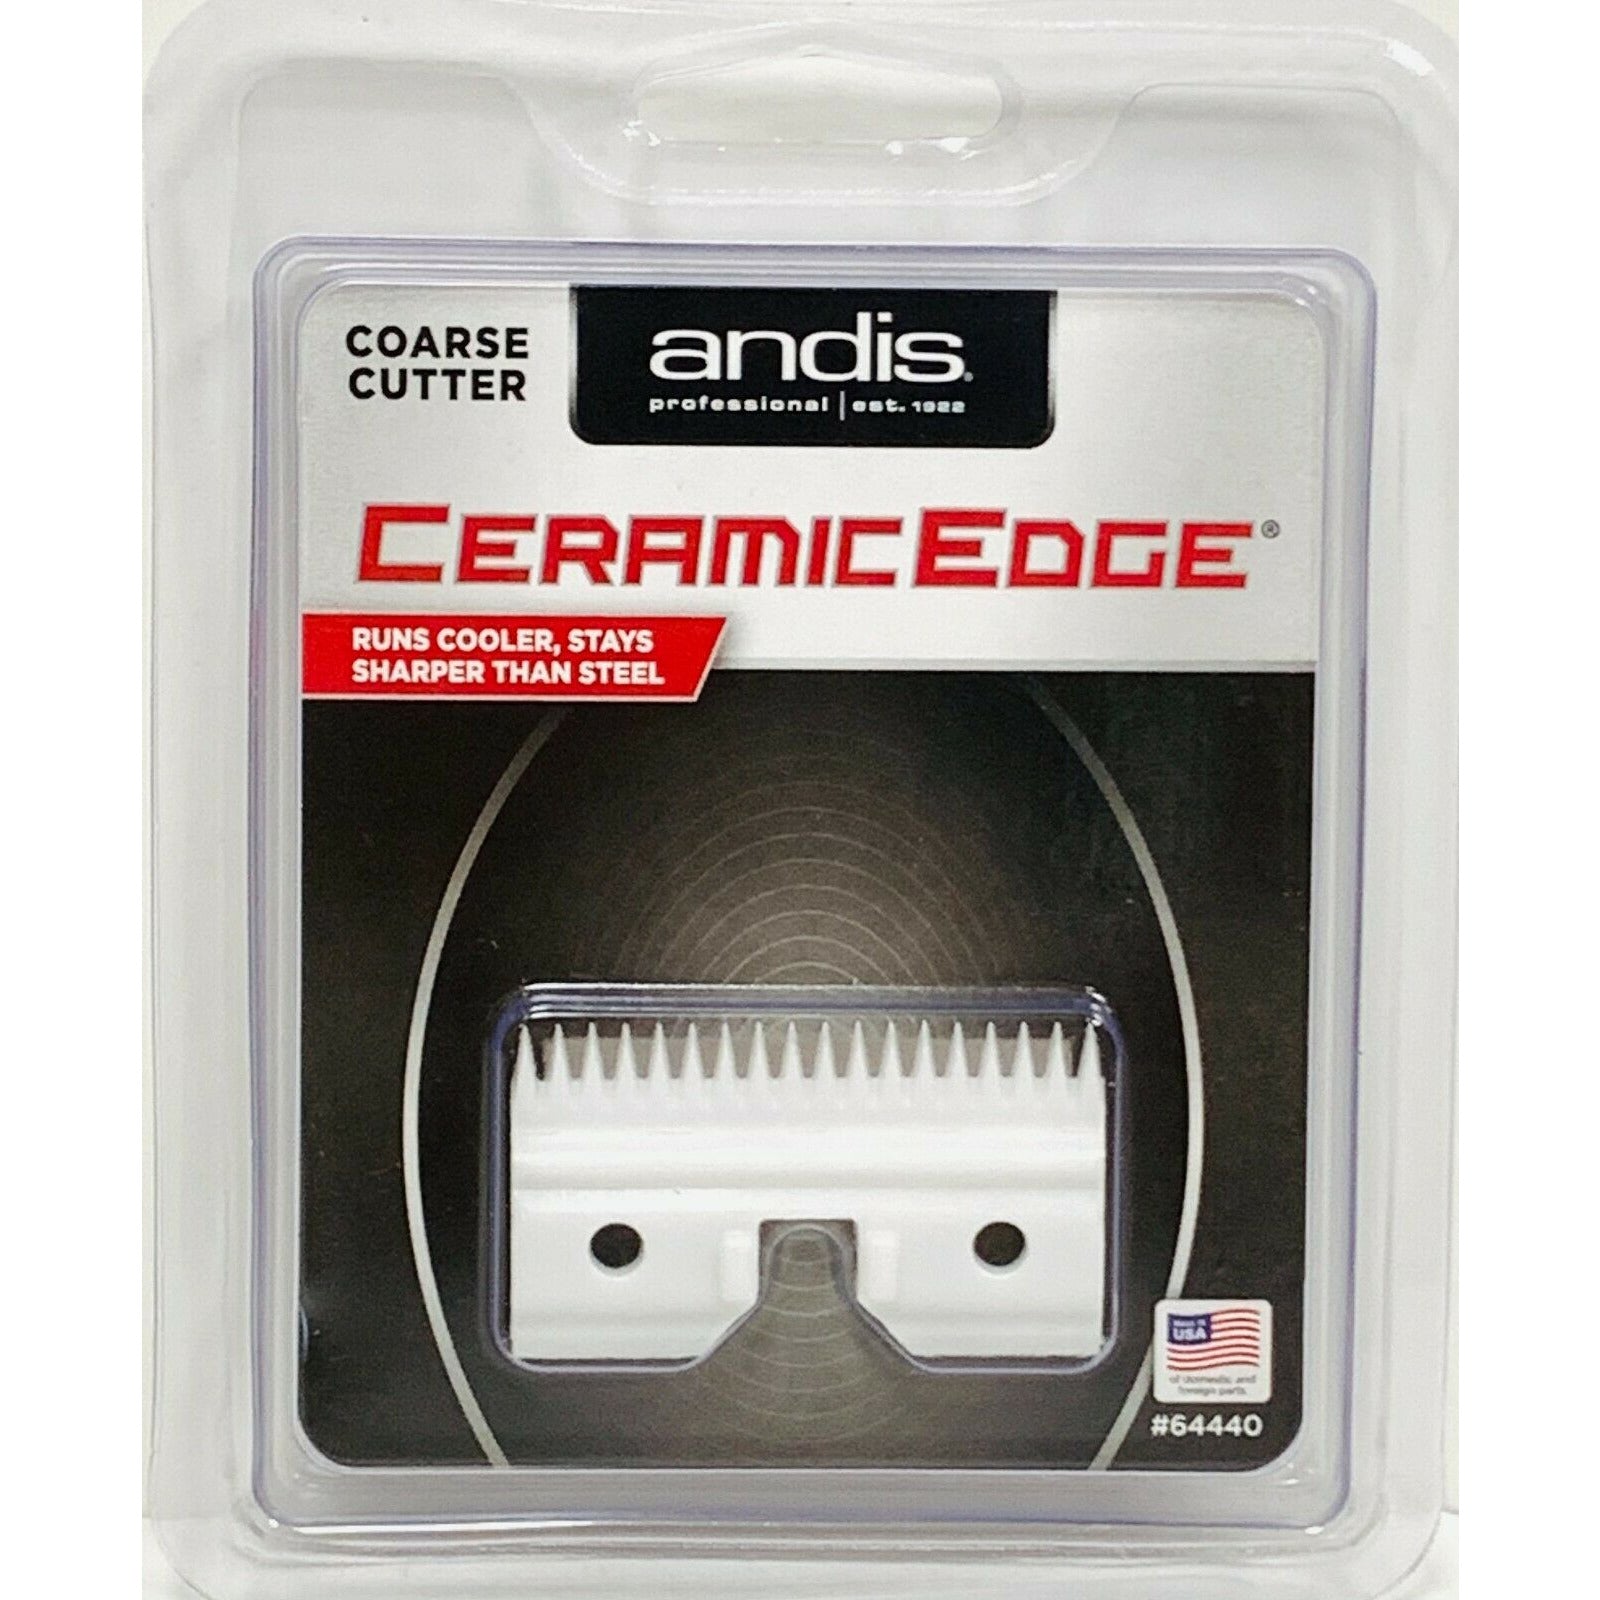 Ceramic Edge 22T Fine Tooth Cutter by Andis